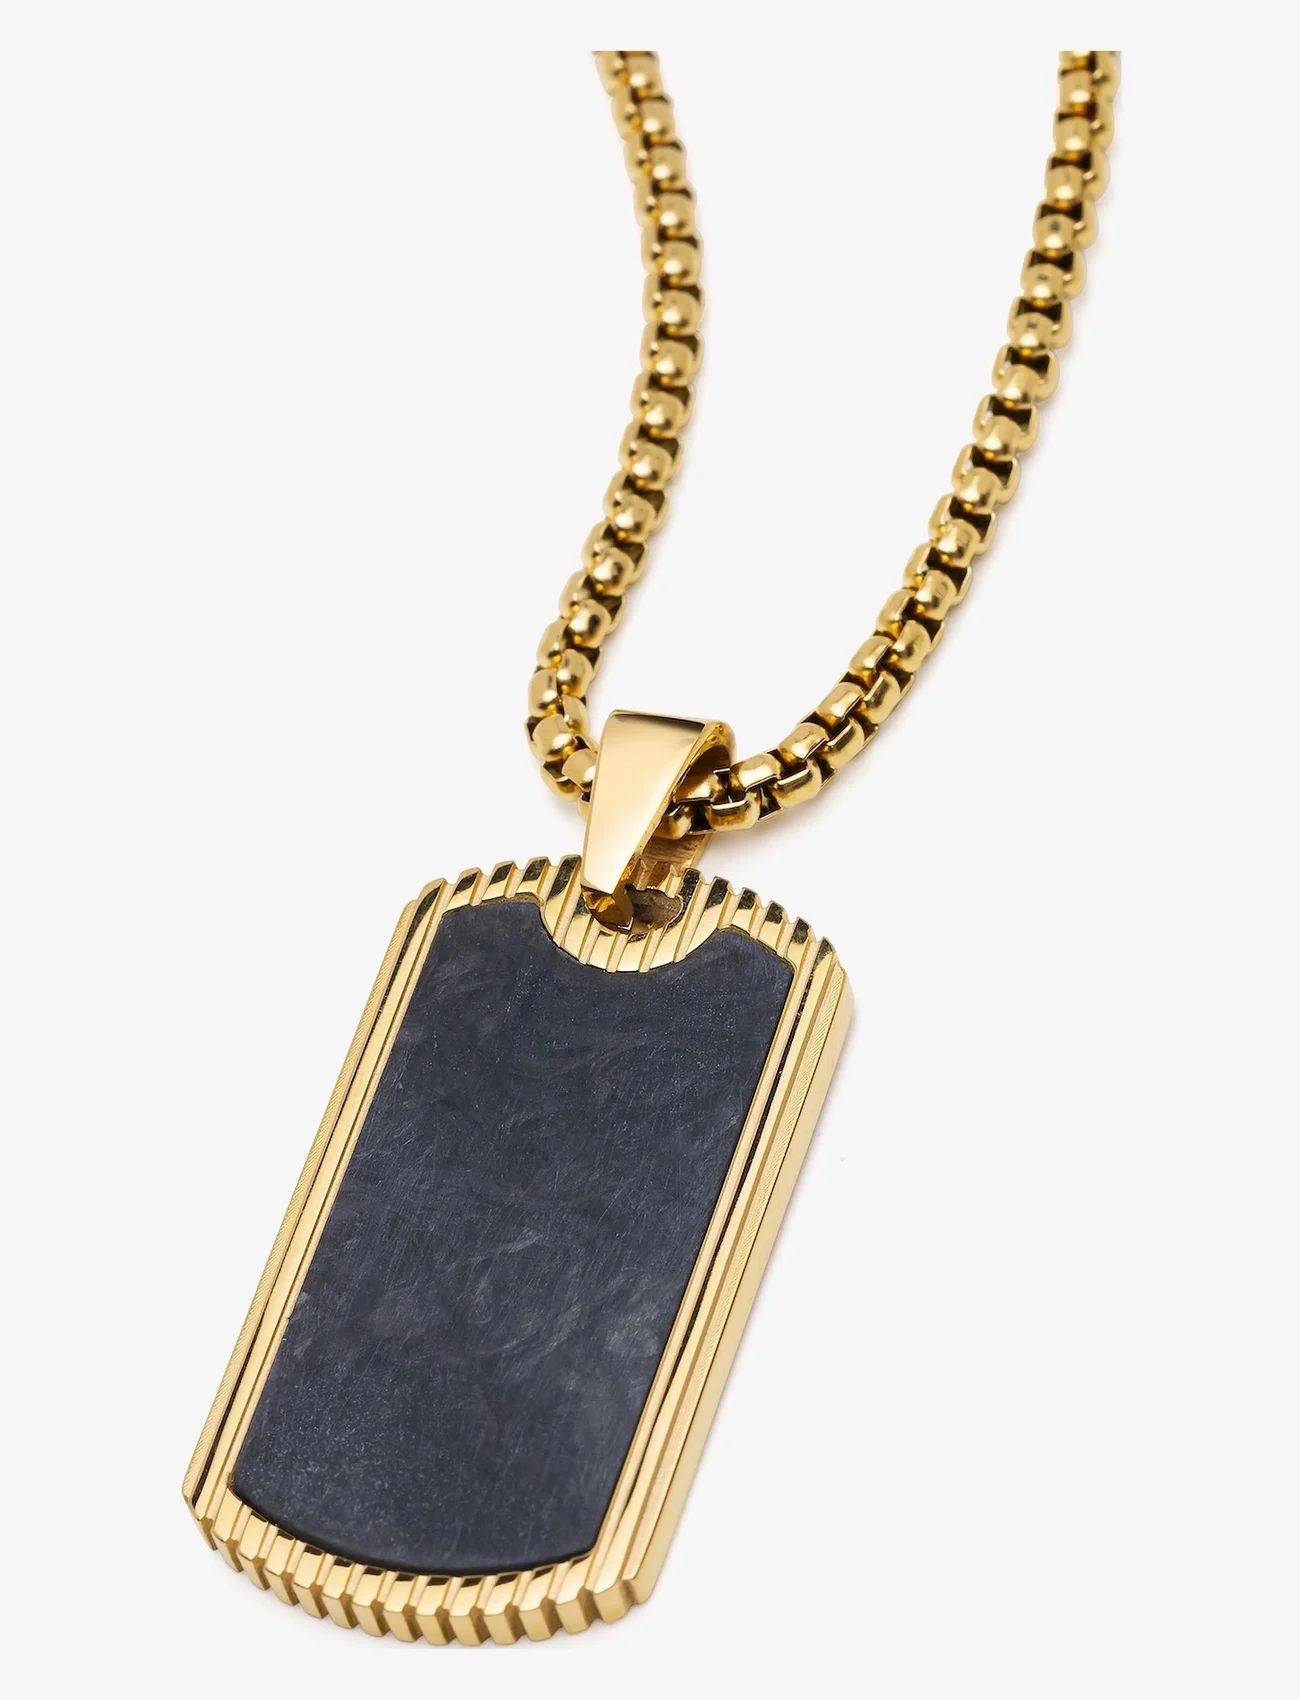 Nialaya - Men's Forged Carbon Dog Tag Necklace - birthday gifts - gold / black - 1